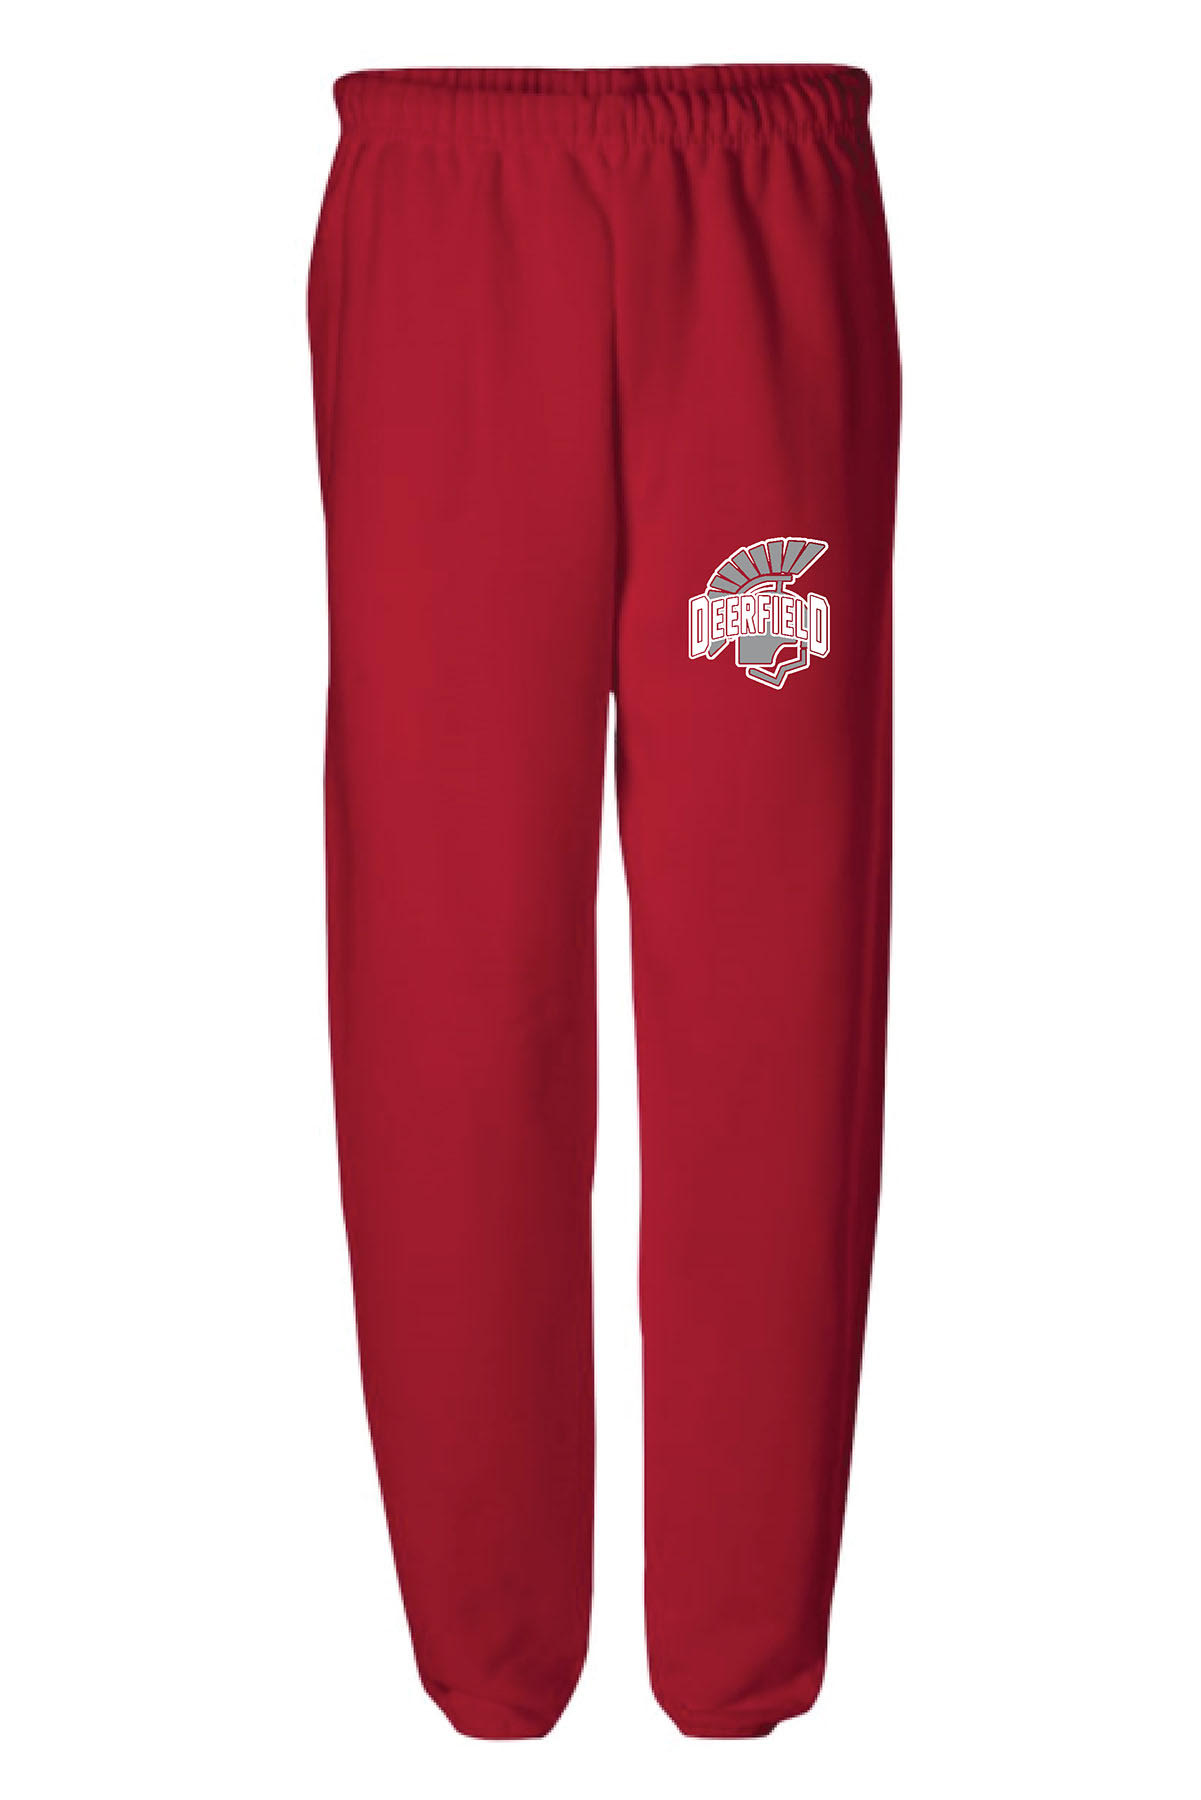 Red Sweatpants - SIZE SMALL ONLY